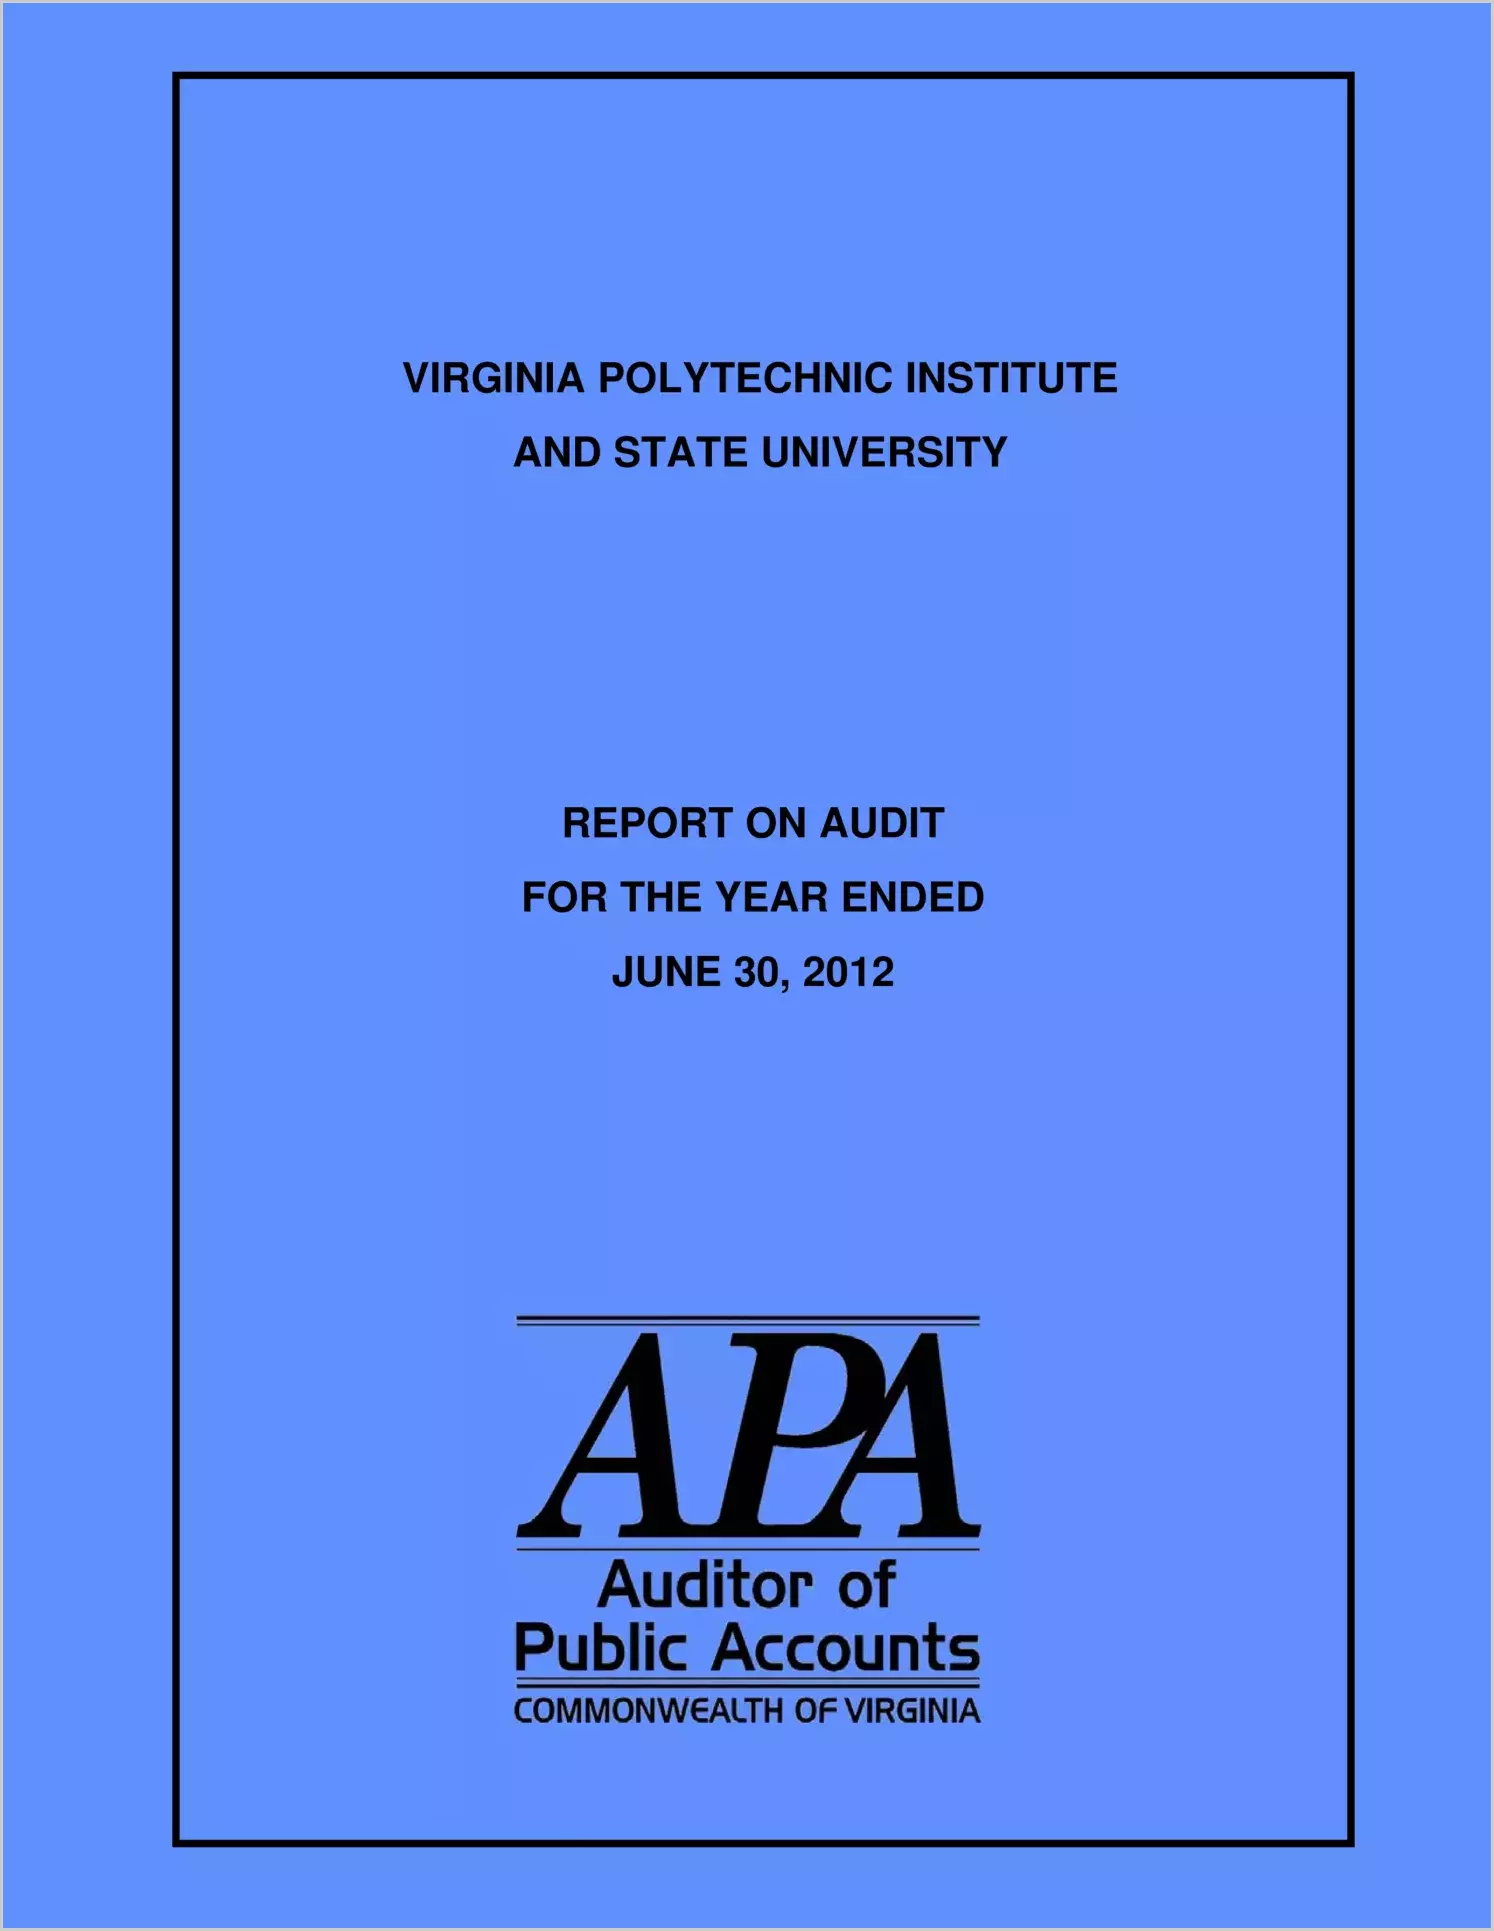 Virginia Polytechnic Institute and State University for the year ended June 30, 2012